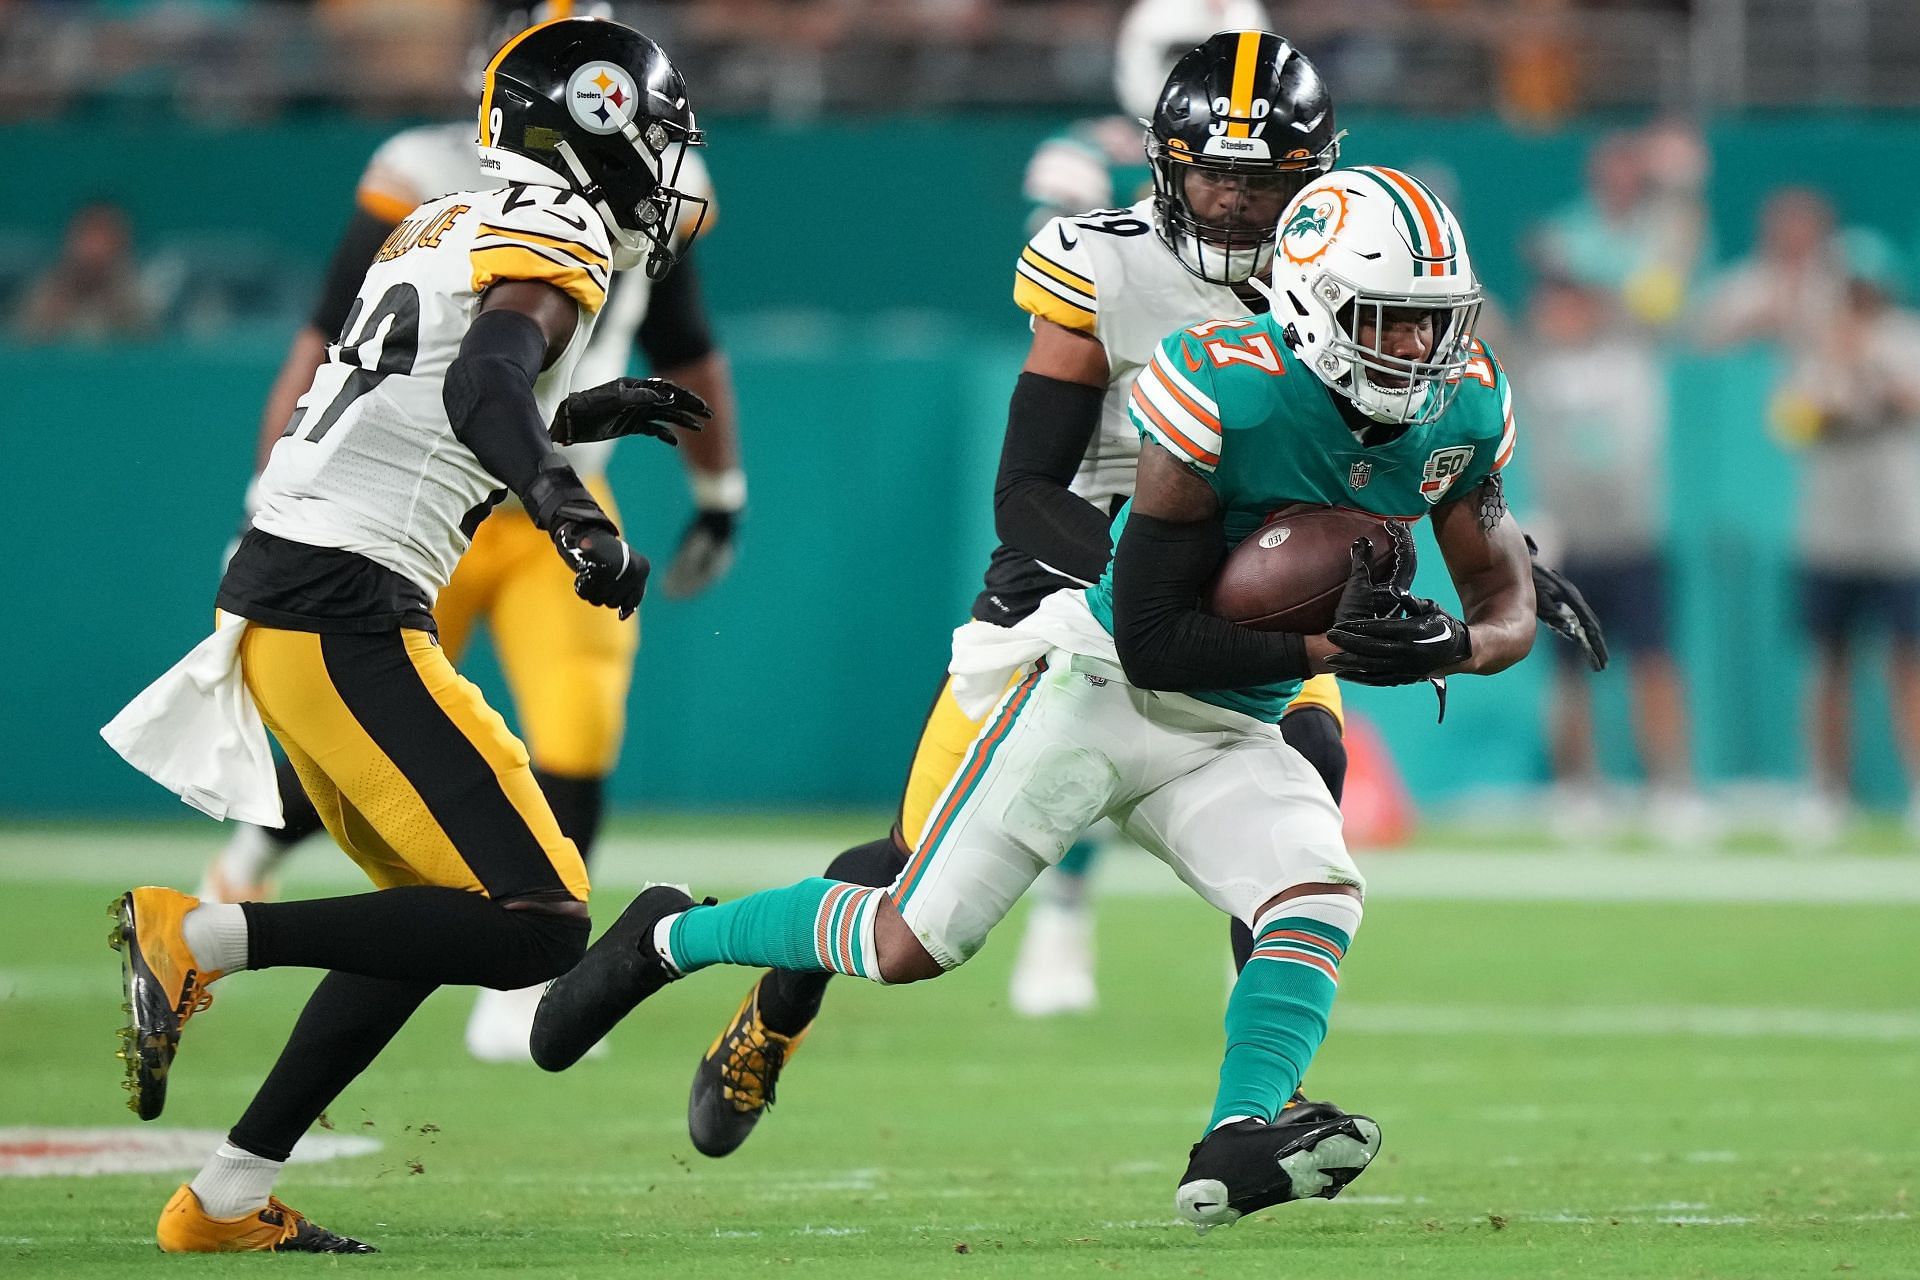 Who won the Steelers vs. Dolphins game last night?